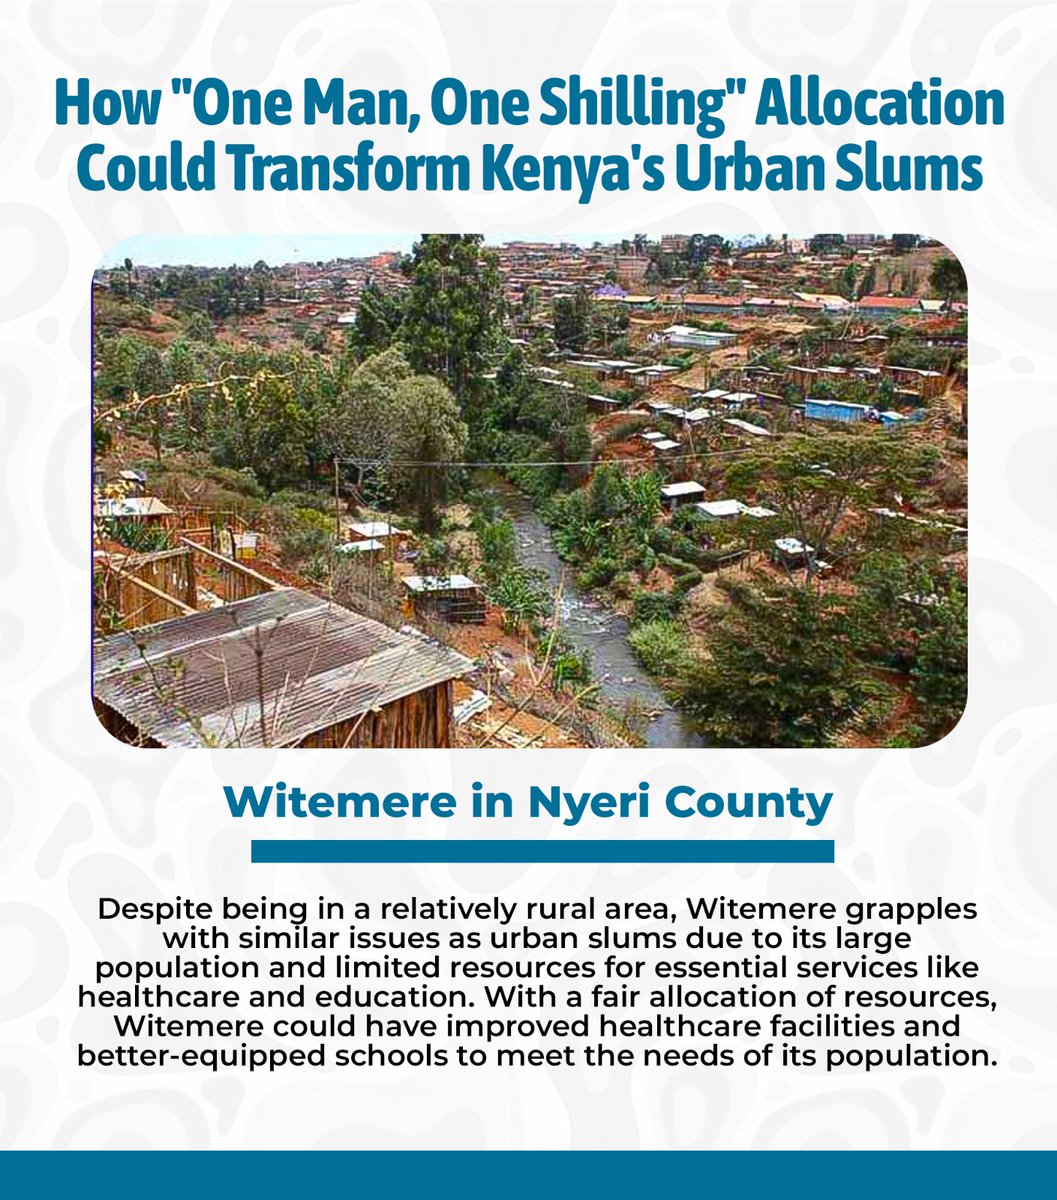 Witemere in Nyeri county is also grappling with similar issues of urban slums because of population  when resources are shared equally with population many kenyans will benefit 
#OneManOneVoteOneShilling
#RigathiOnAssignment
Fair resource allocation